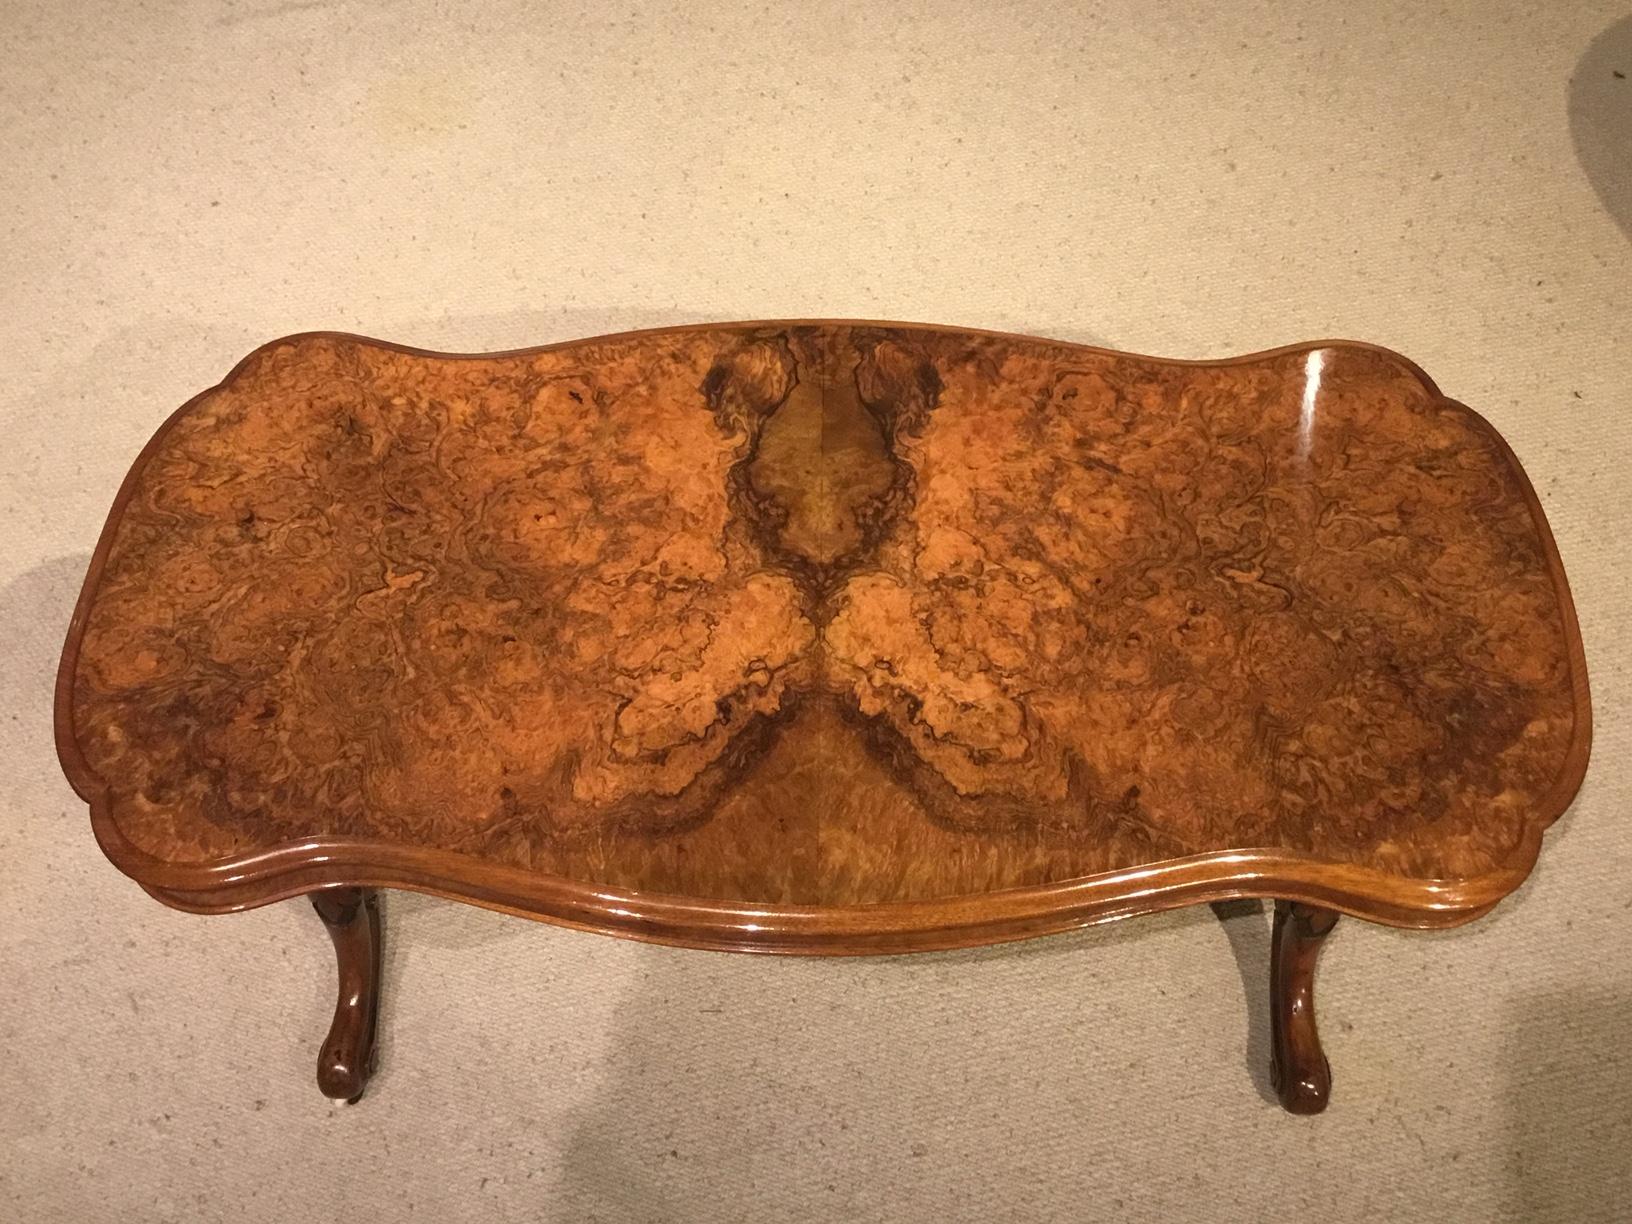 A superb burr walnut Victorian period coffee table. Having a serpentine shaped top veneered in the finest burr walnut . With a burr walnut veneered frieze and supported on turned and carved column supports with floral carved cabriole feet and brass